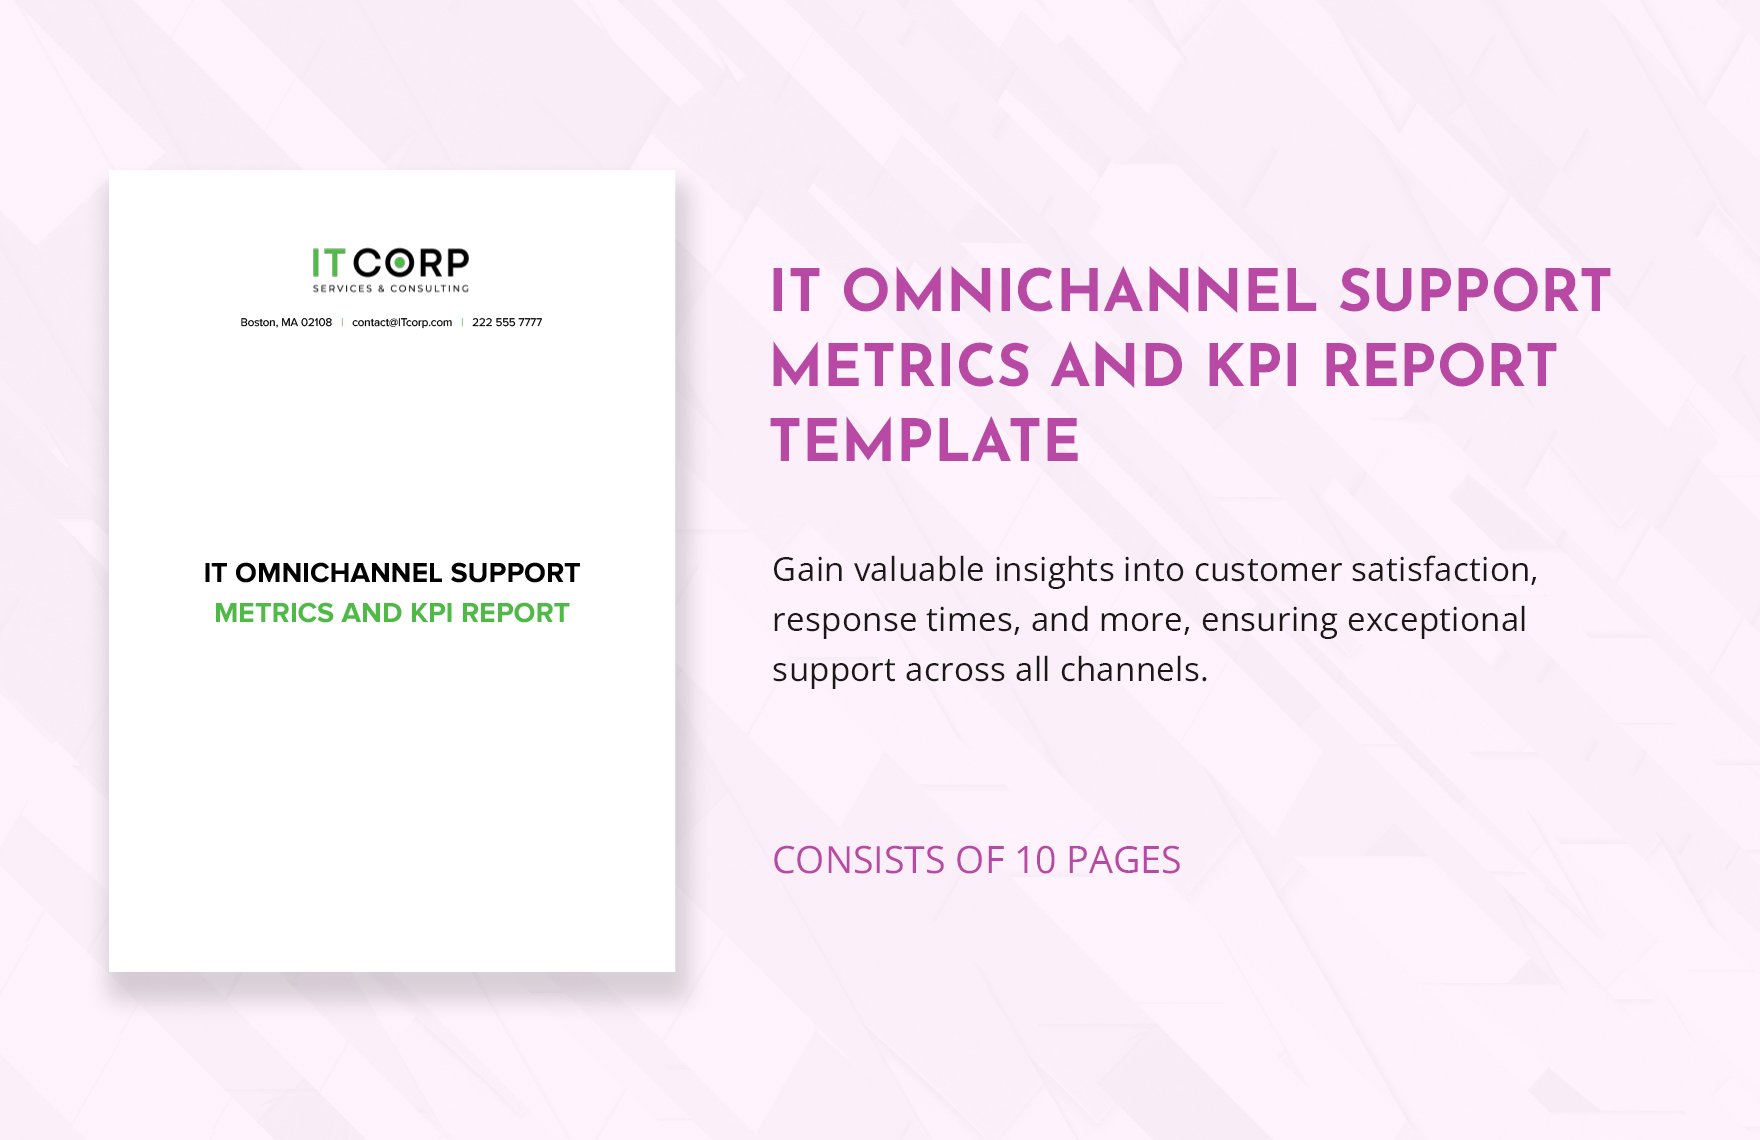 IT Omnichannel Support Metrics and KPI Report Template